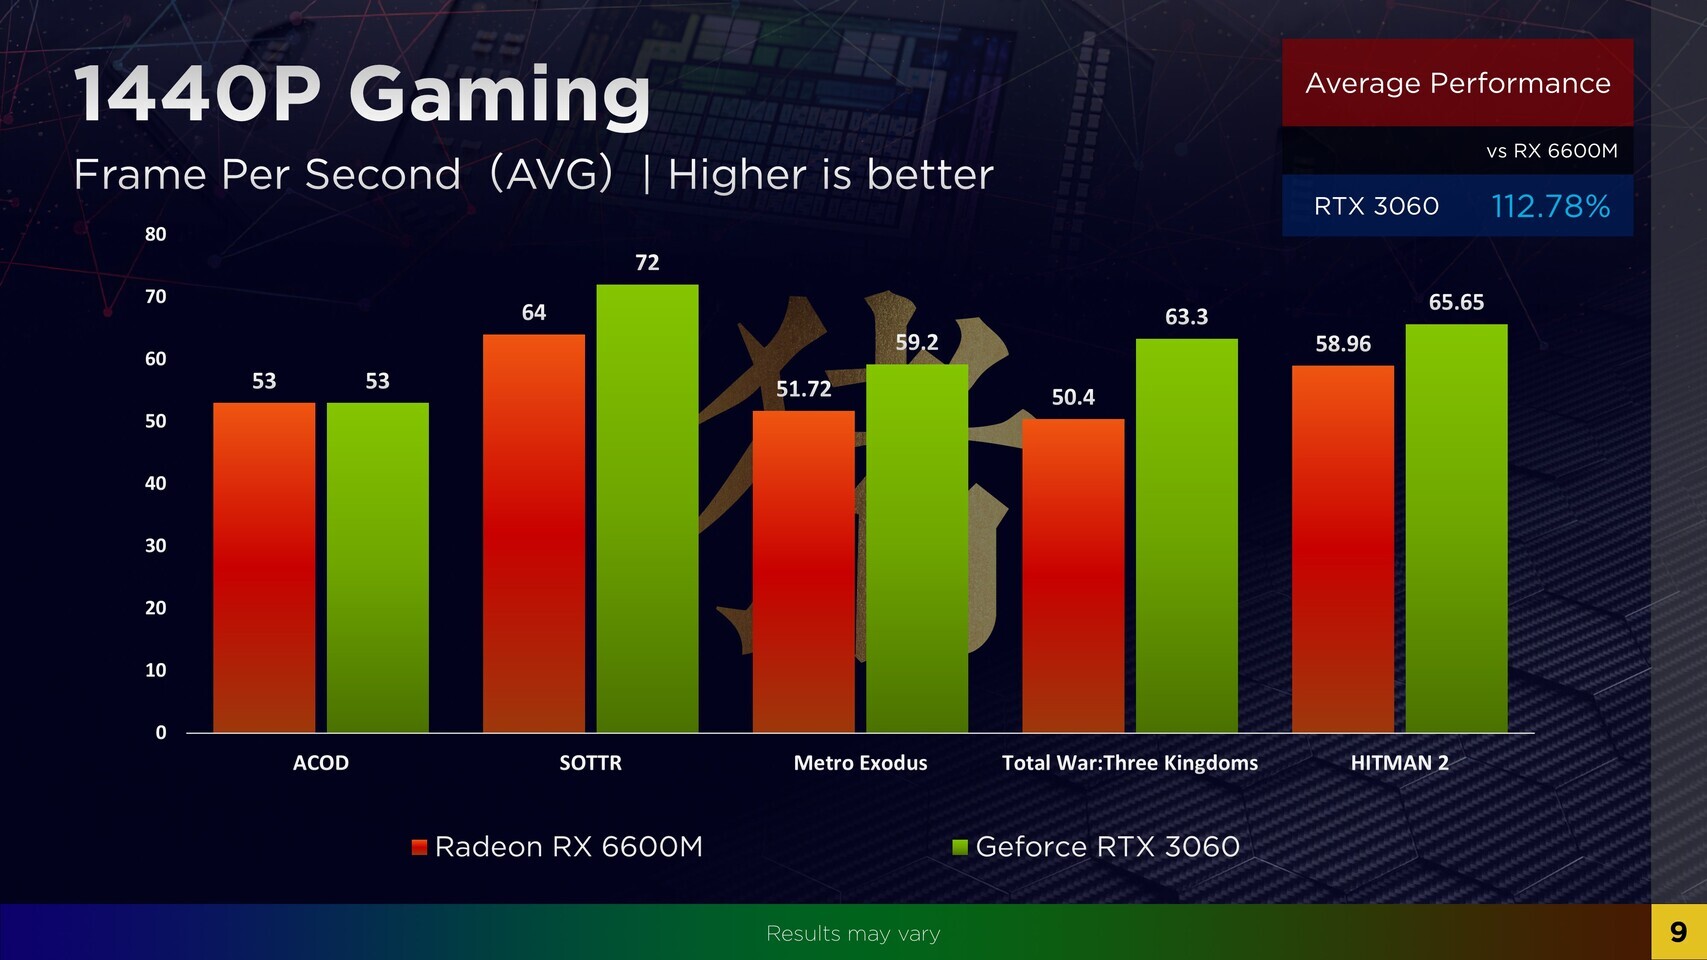 Amd Radeon Rx M Tested Compared With Geforce Rtx Laptop Gpu Techpowerup